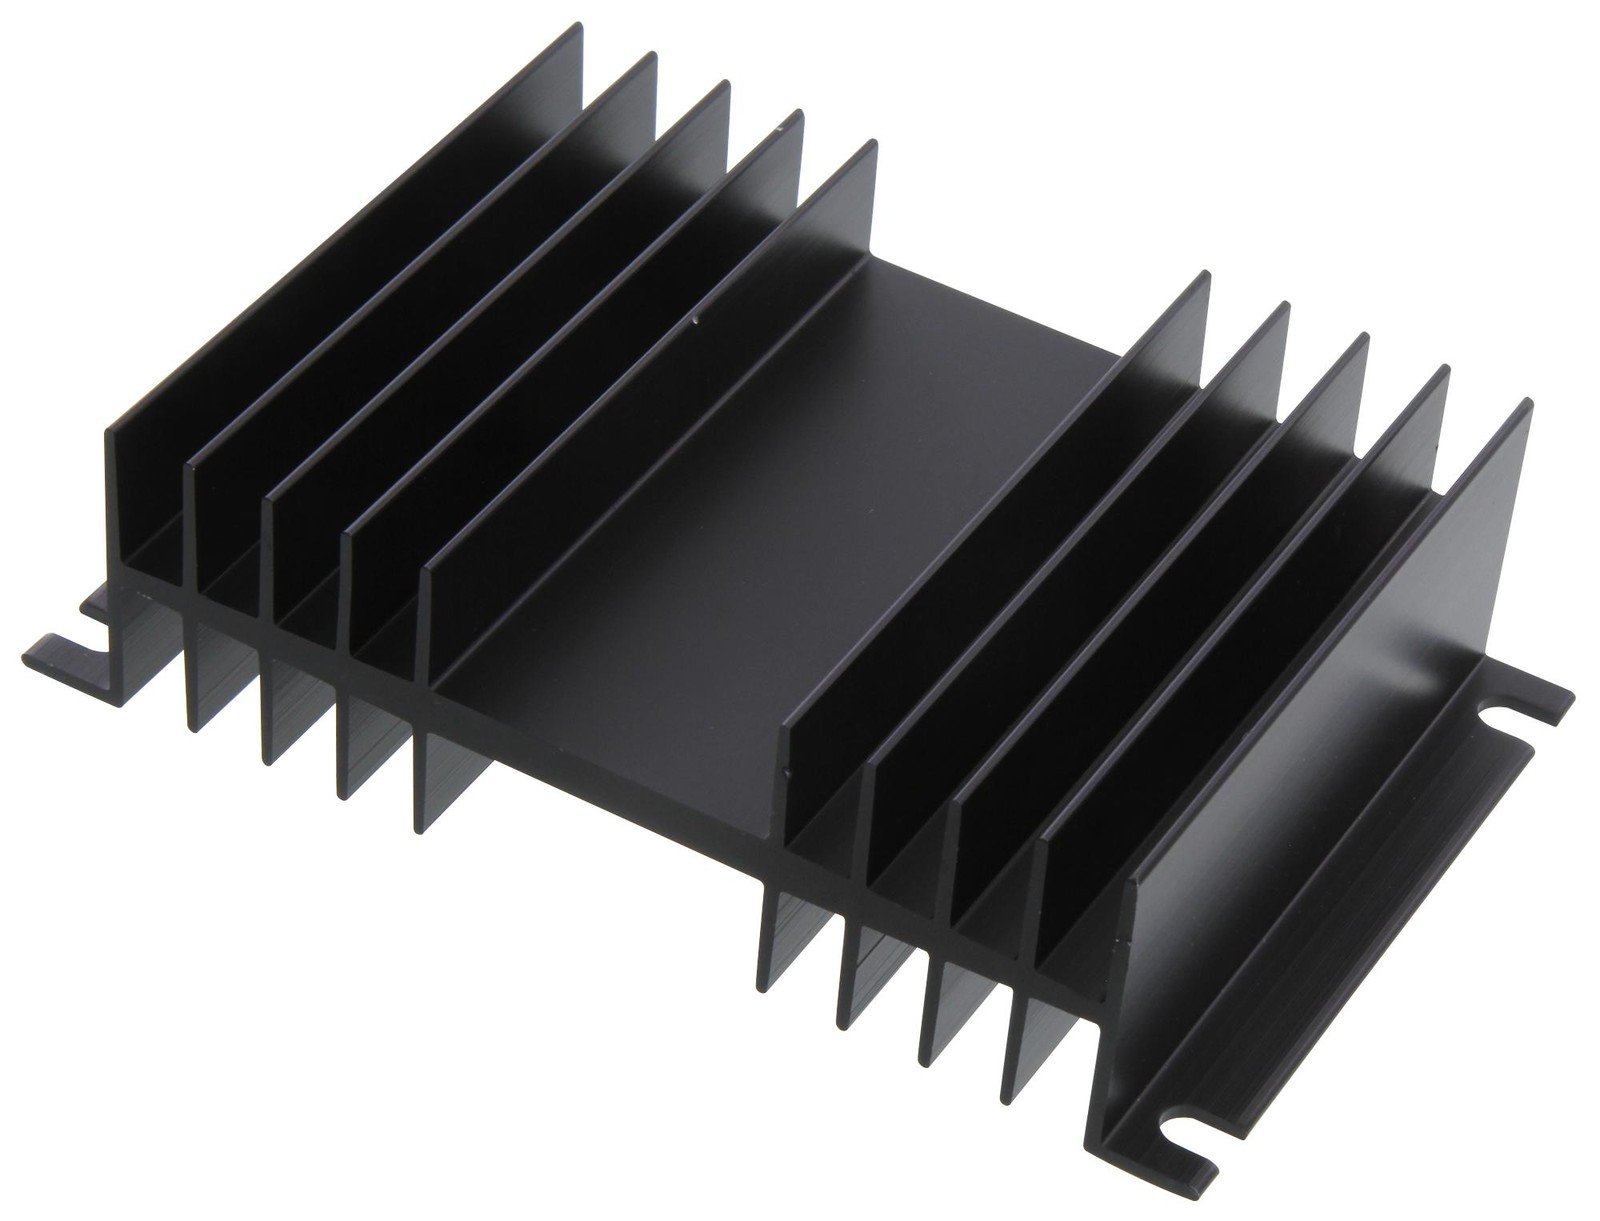 Wakefield Thermal 403K Heat Sink, Natural Convection, 55Â°C @ 30W